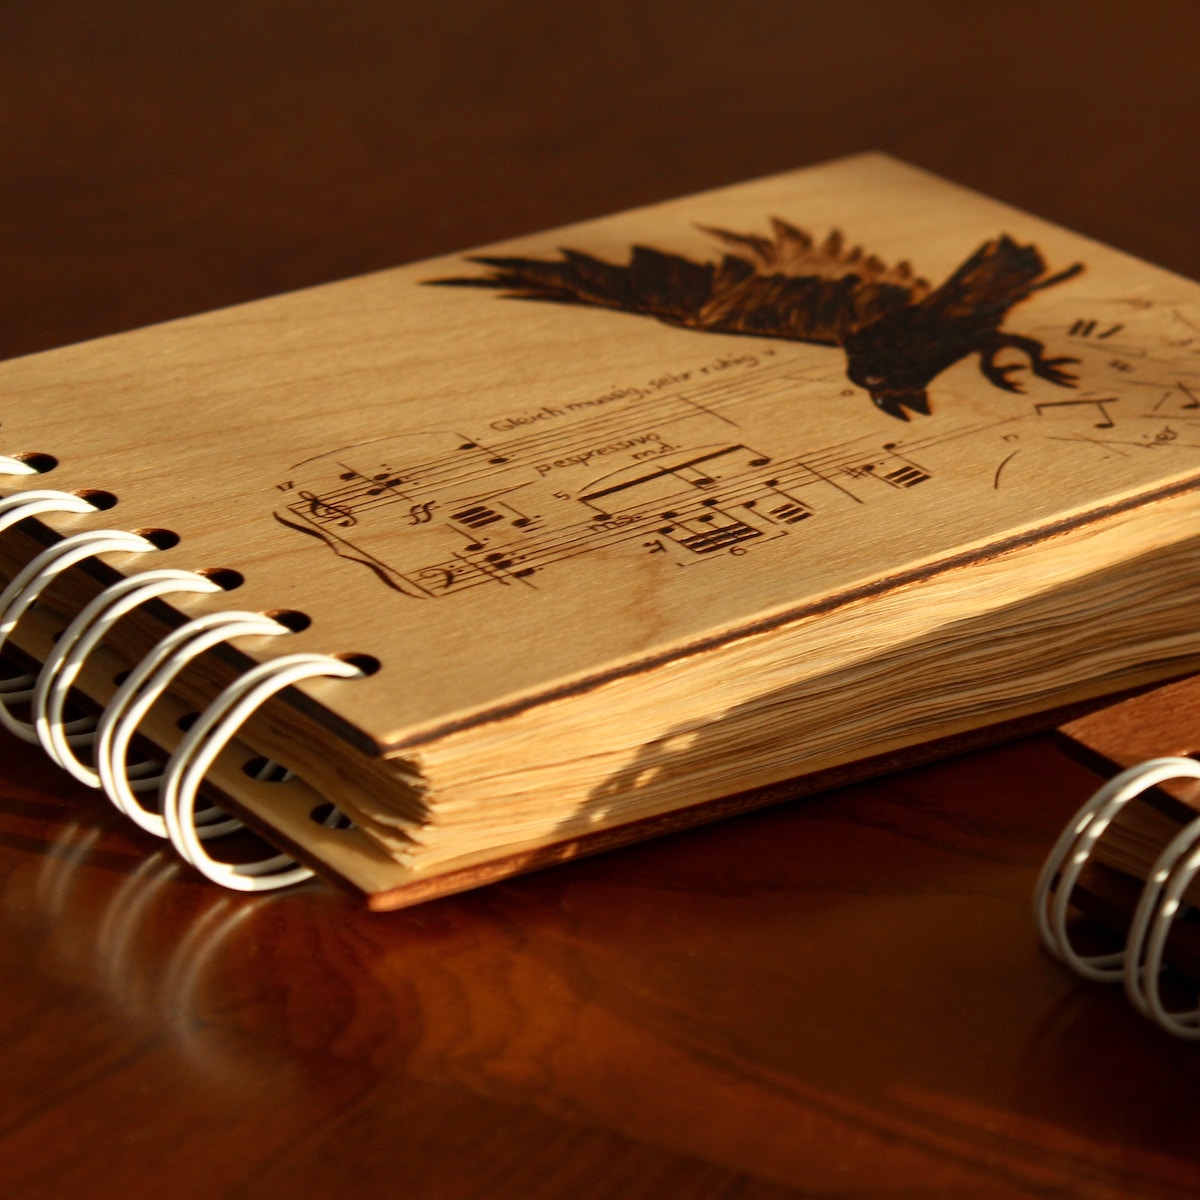 a wooden notebook with music notes on it